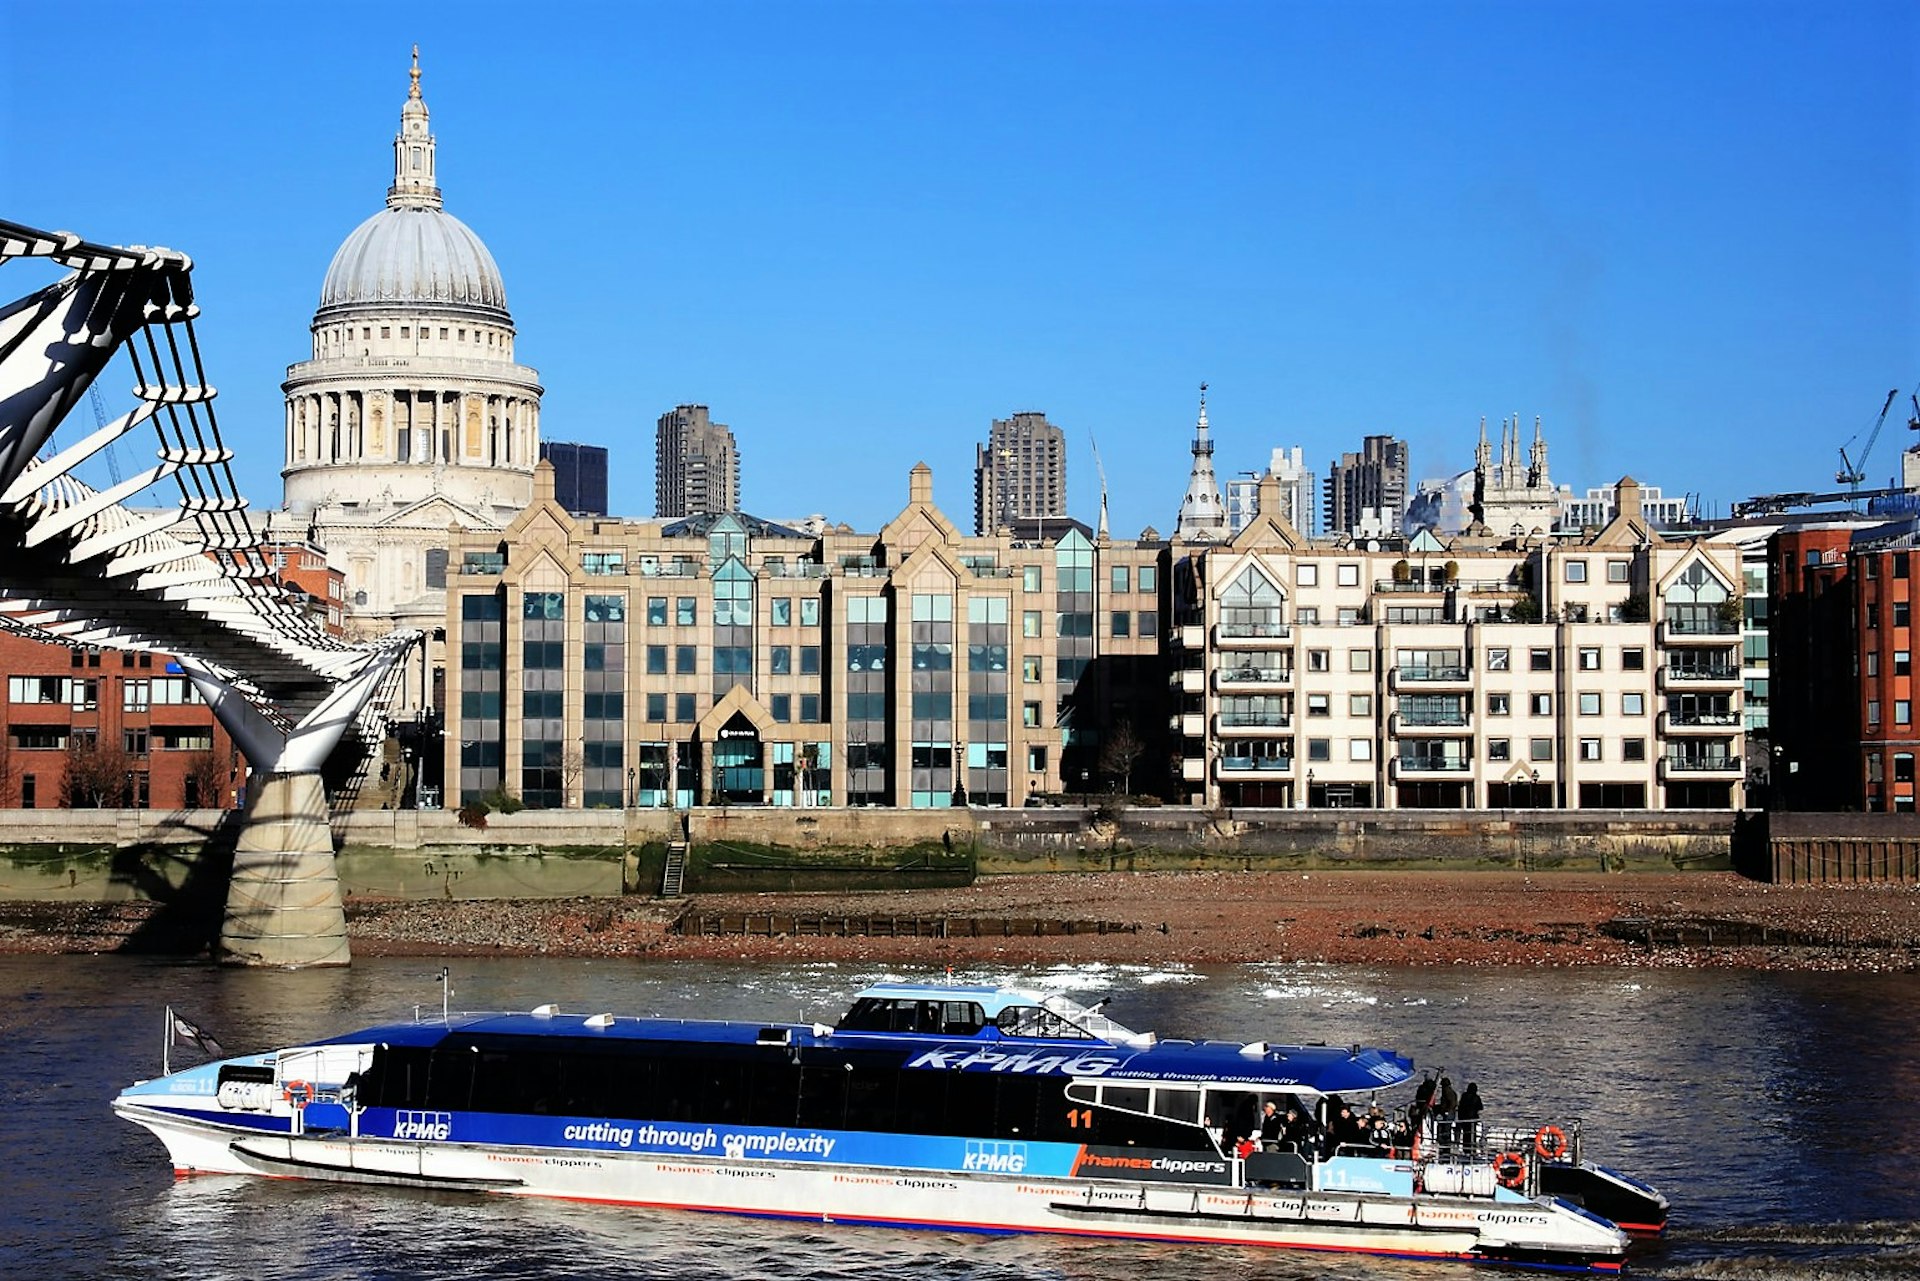 A Thames Clipper boat glides past St Paul's Cathedral on the river